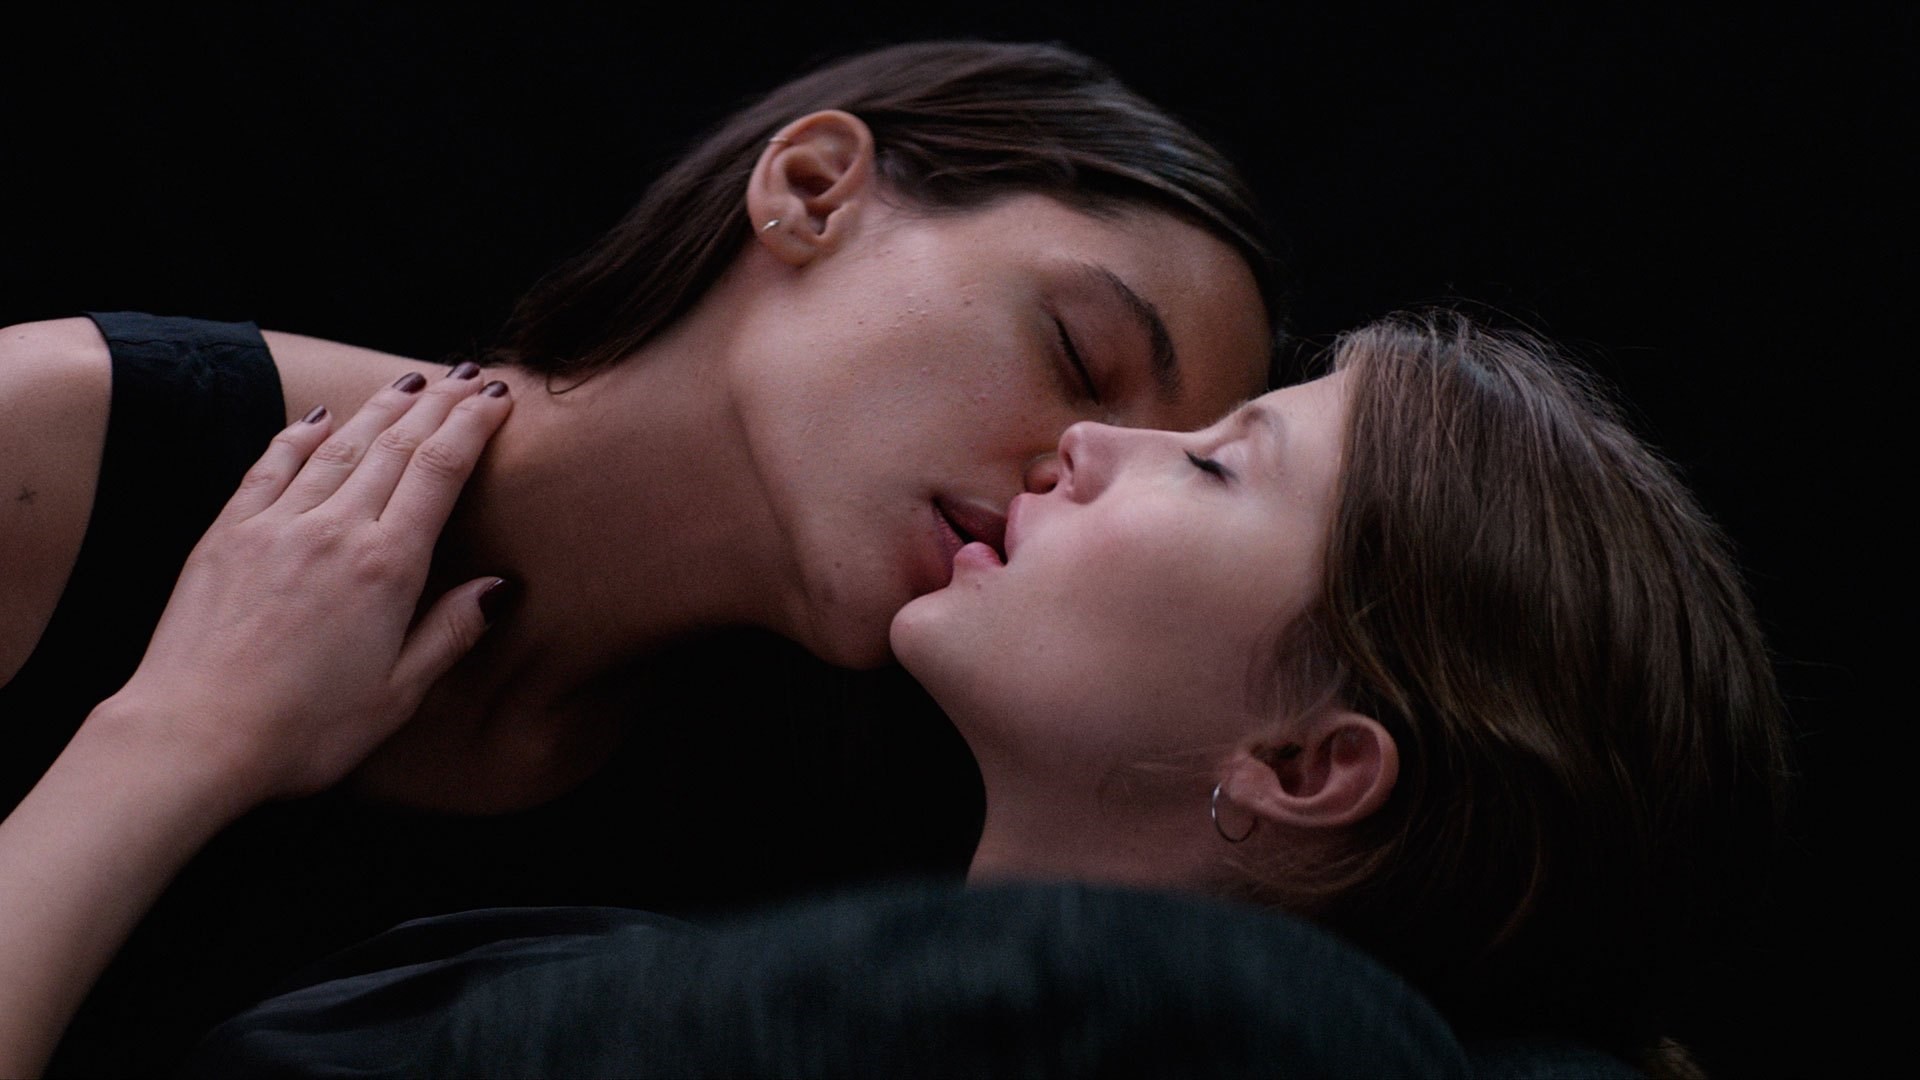 The horror film about lesbian love, wild powers and sexuality Dazed